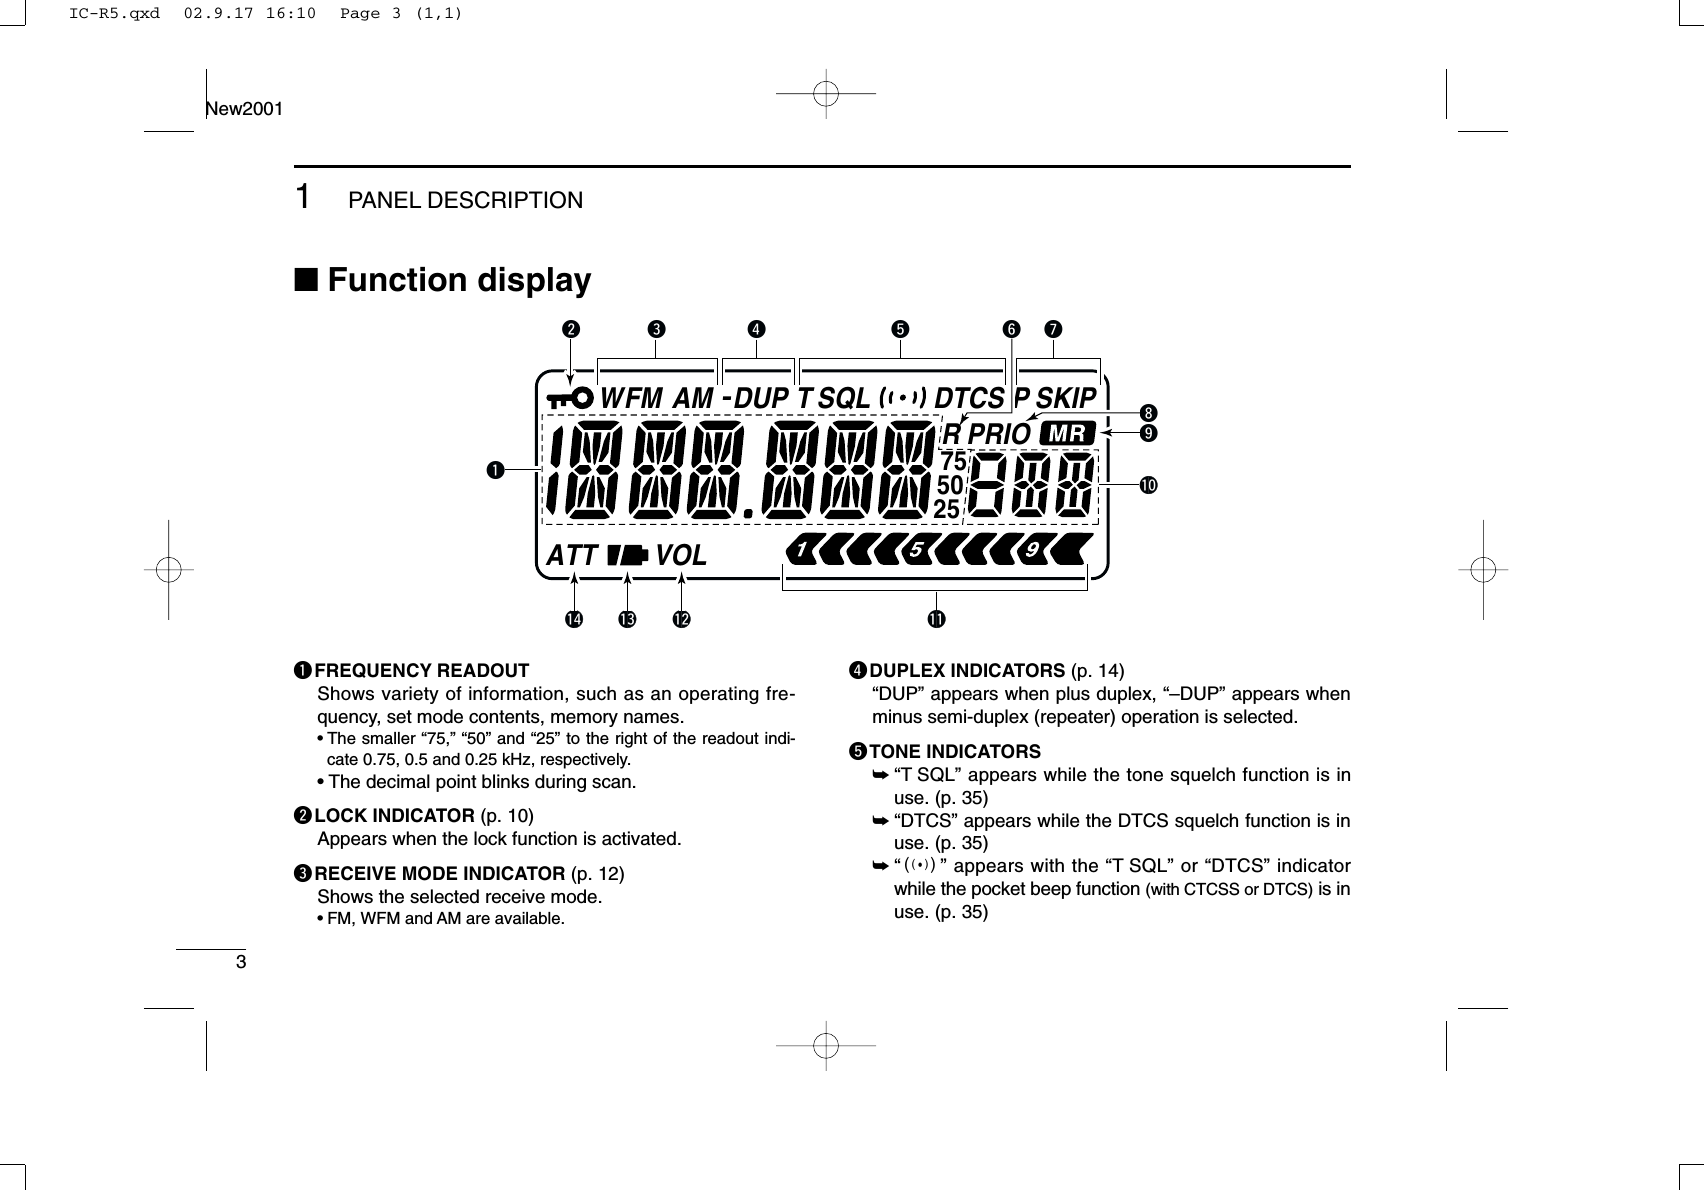 31PANEL DESCRIPTIONNew2001■Function displayqFREQUENCY READOUT Shows variety of information, such as an operating fre-quency, set mode contents, memory names.•The smaller “75,” “50” and “25” to the right of the readout indi-cate 0.75, 0.5 and 0.25 kHz, respectively.•The decimal point blinks during scan.wLOCK INDICATOR (p. 10)Appears when the lock function is activated.eRECEIVE MODE INDICATOR (p. 12)Shows the selected receive mode.•FM, WFM and AM are available.rDUPLEX INDICATORS (p. 14)“DUP” appears when plus duplex, “–DUP” appears whenminus semi-duplex (repeater) operation is selected.tTONE INDICATORS➥“T SQL” appears while the tone squelch function is inuse. (p. 35)➥“DTCS” appears while the DTCS squelch function is inuse. (p. 35)➥“S” appears with the “T SQL” or “DTCS” indicatorwhile the pocket beep function (with CTCSS or DTCS) is inuse. (p. 35)FMATT VOLAM DUP SQL DTCS SKIPTPPRIO755025WRqwe r t yuio!4!0!3 !2 !1IC-R5.qxd  02.9.17 16:10  Page 3 (1,1)